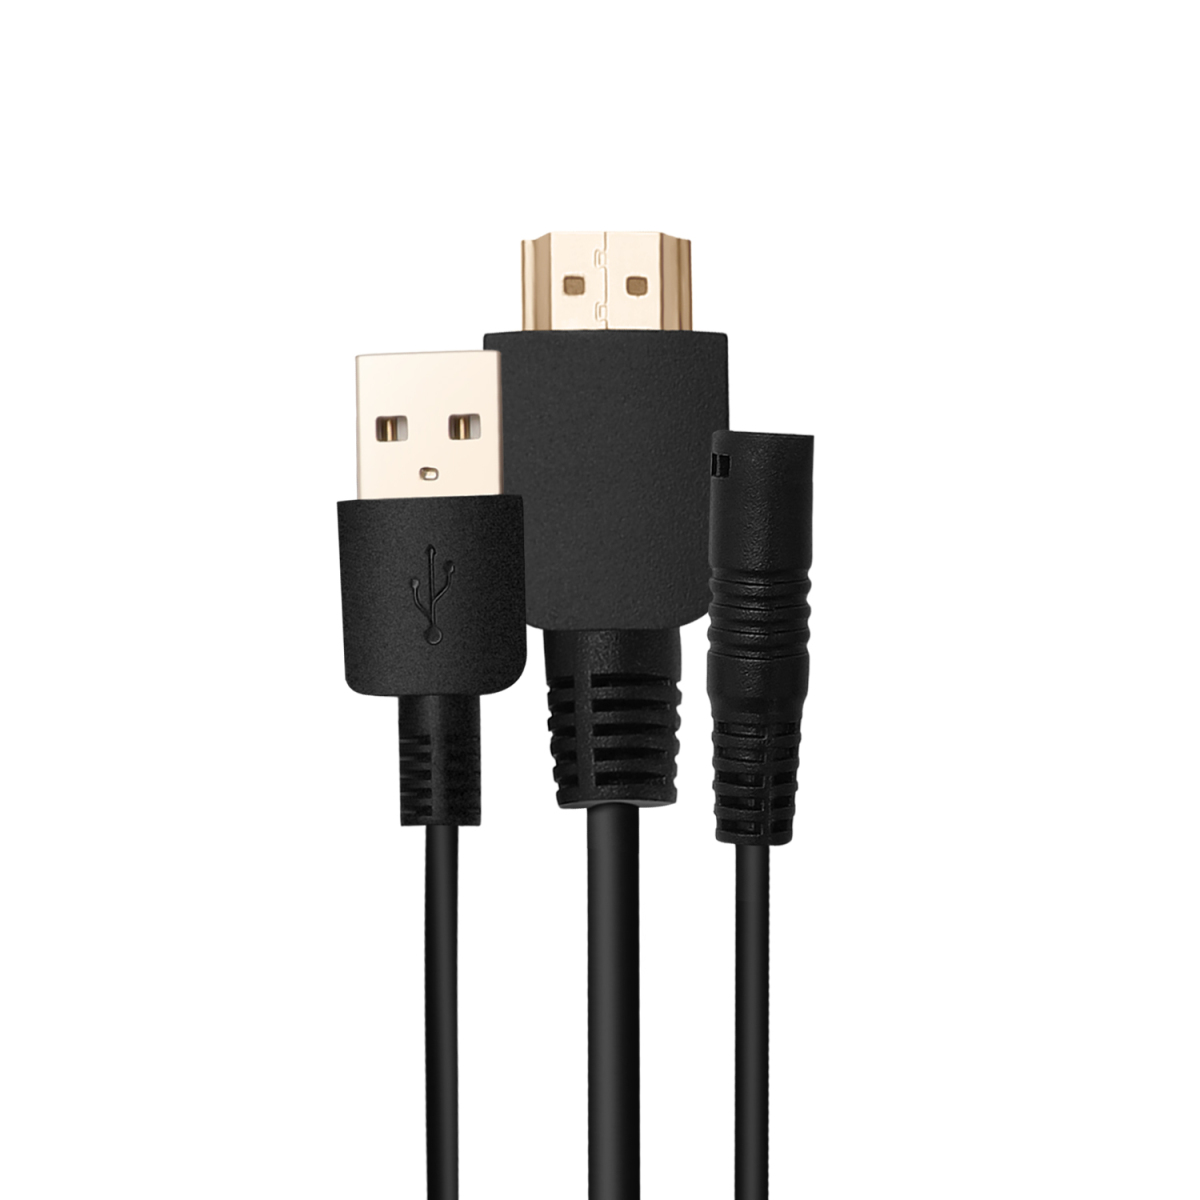 3-in-1 Cable CB06 for Huion Kamvas 22/24 Series